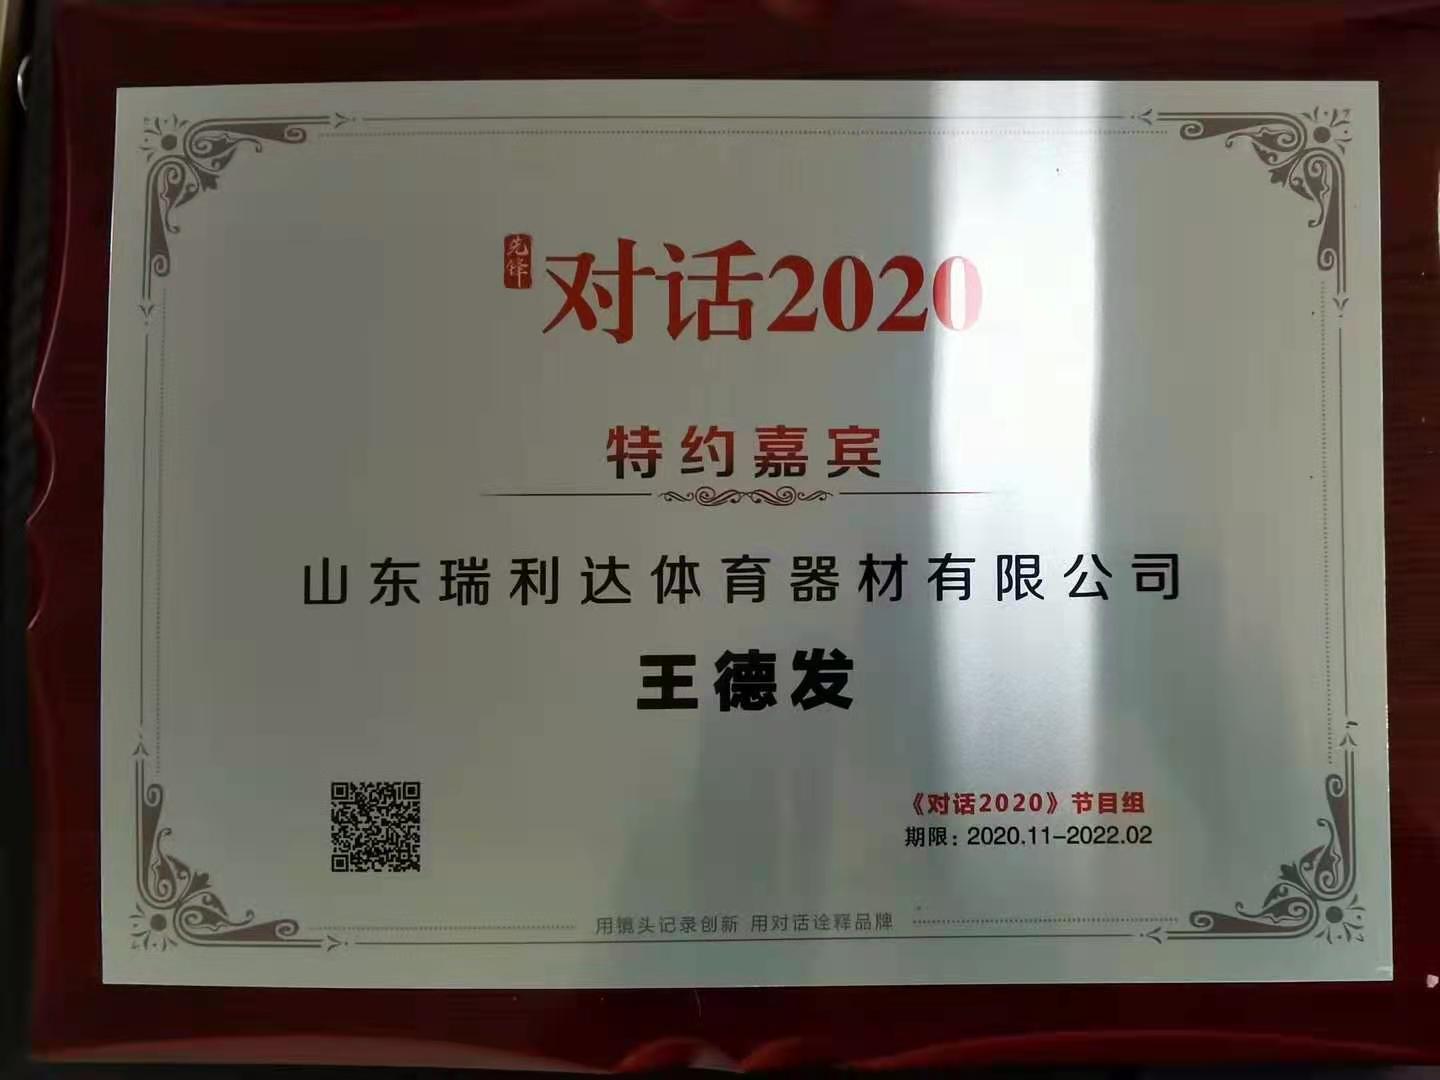 Realleader was shortlisted for the Chinese brand development project (2)